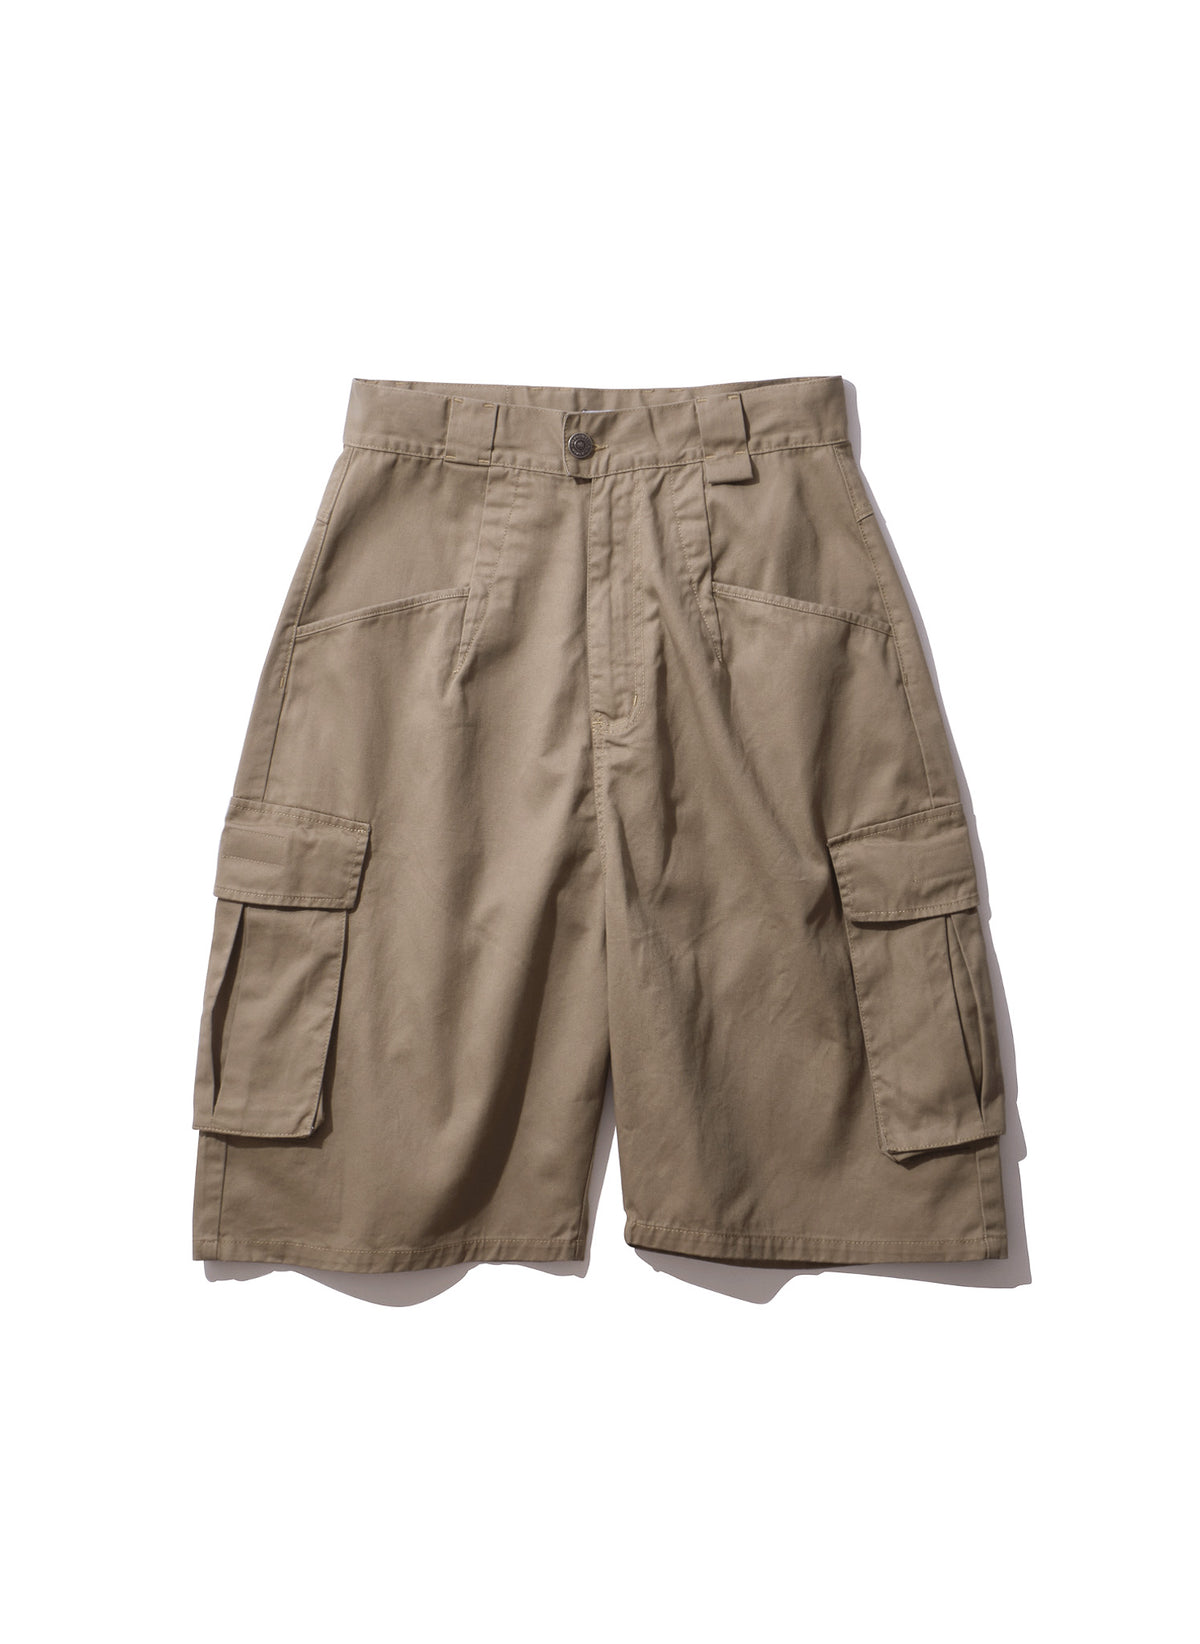 <span style="color: #f50b0b;">Last One</span> WILLY CHAVARRIA / CARGO SHORTS CHALK